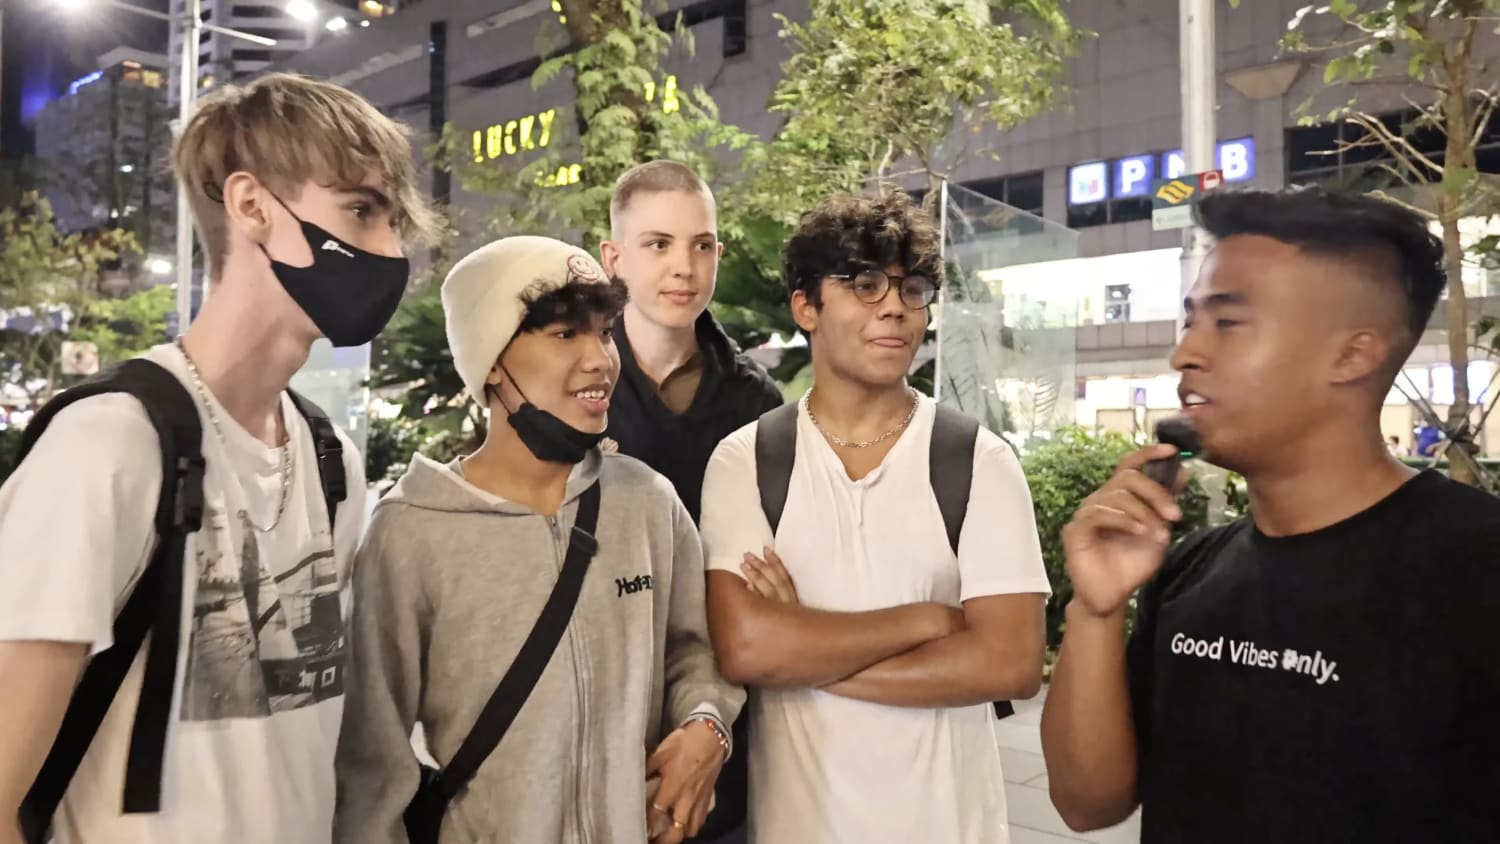 Four young men interviewed by a TikTok content creator have received flak from social media users for their views on dating preferences.